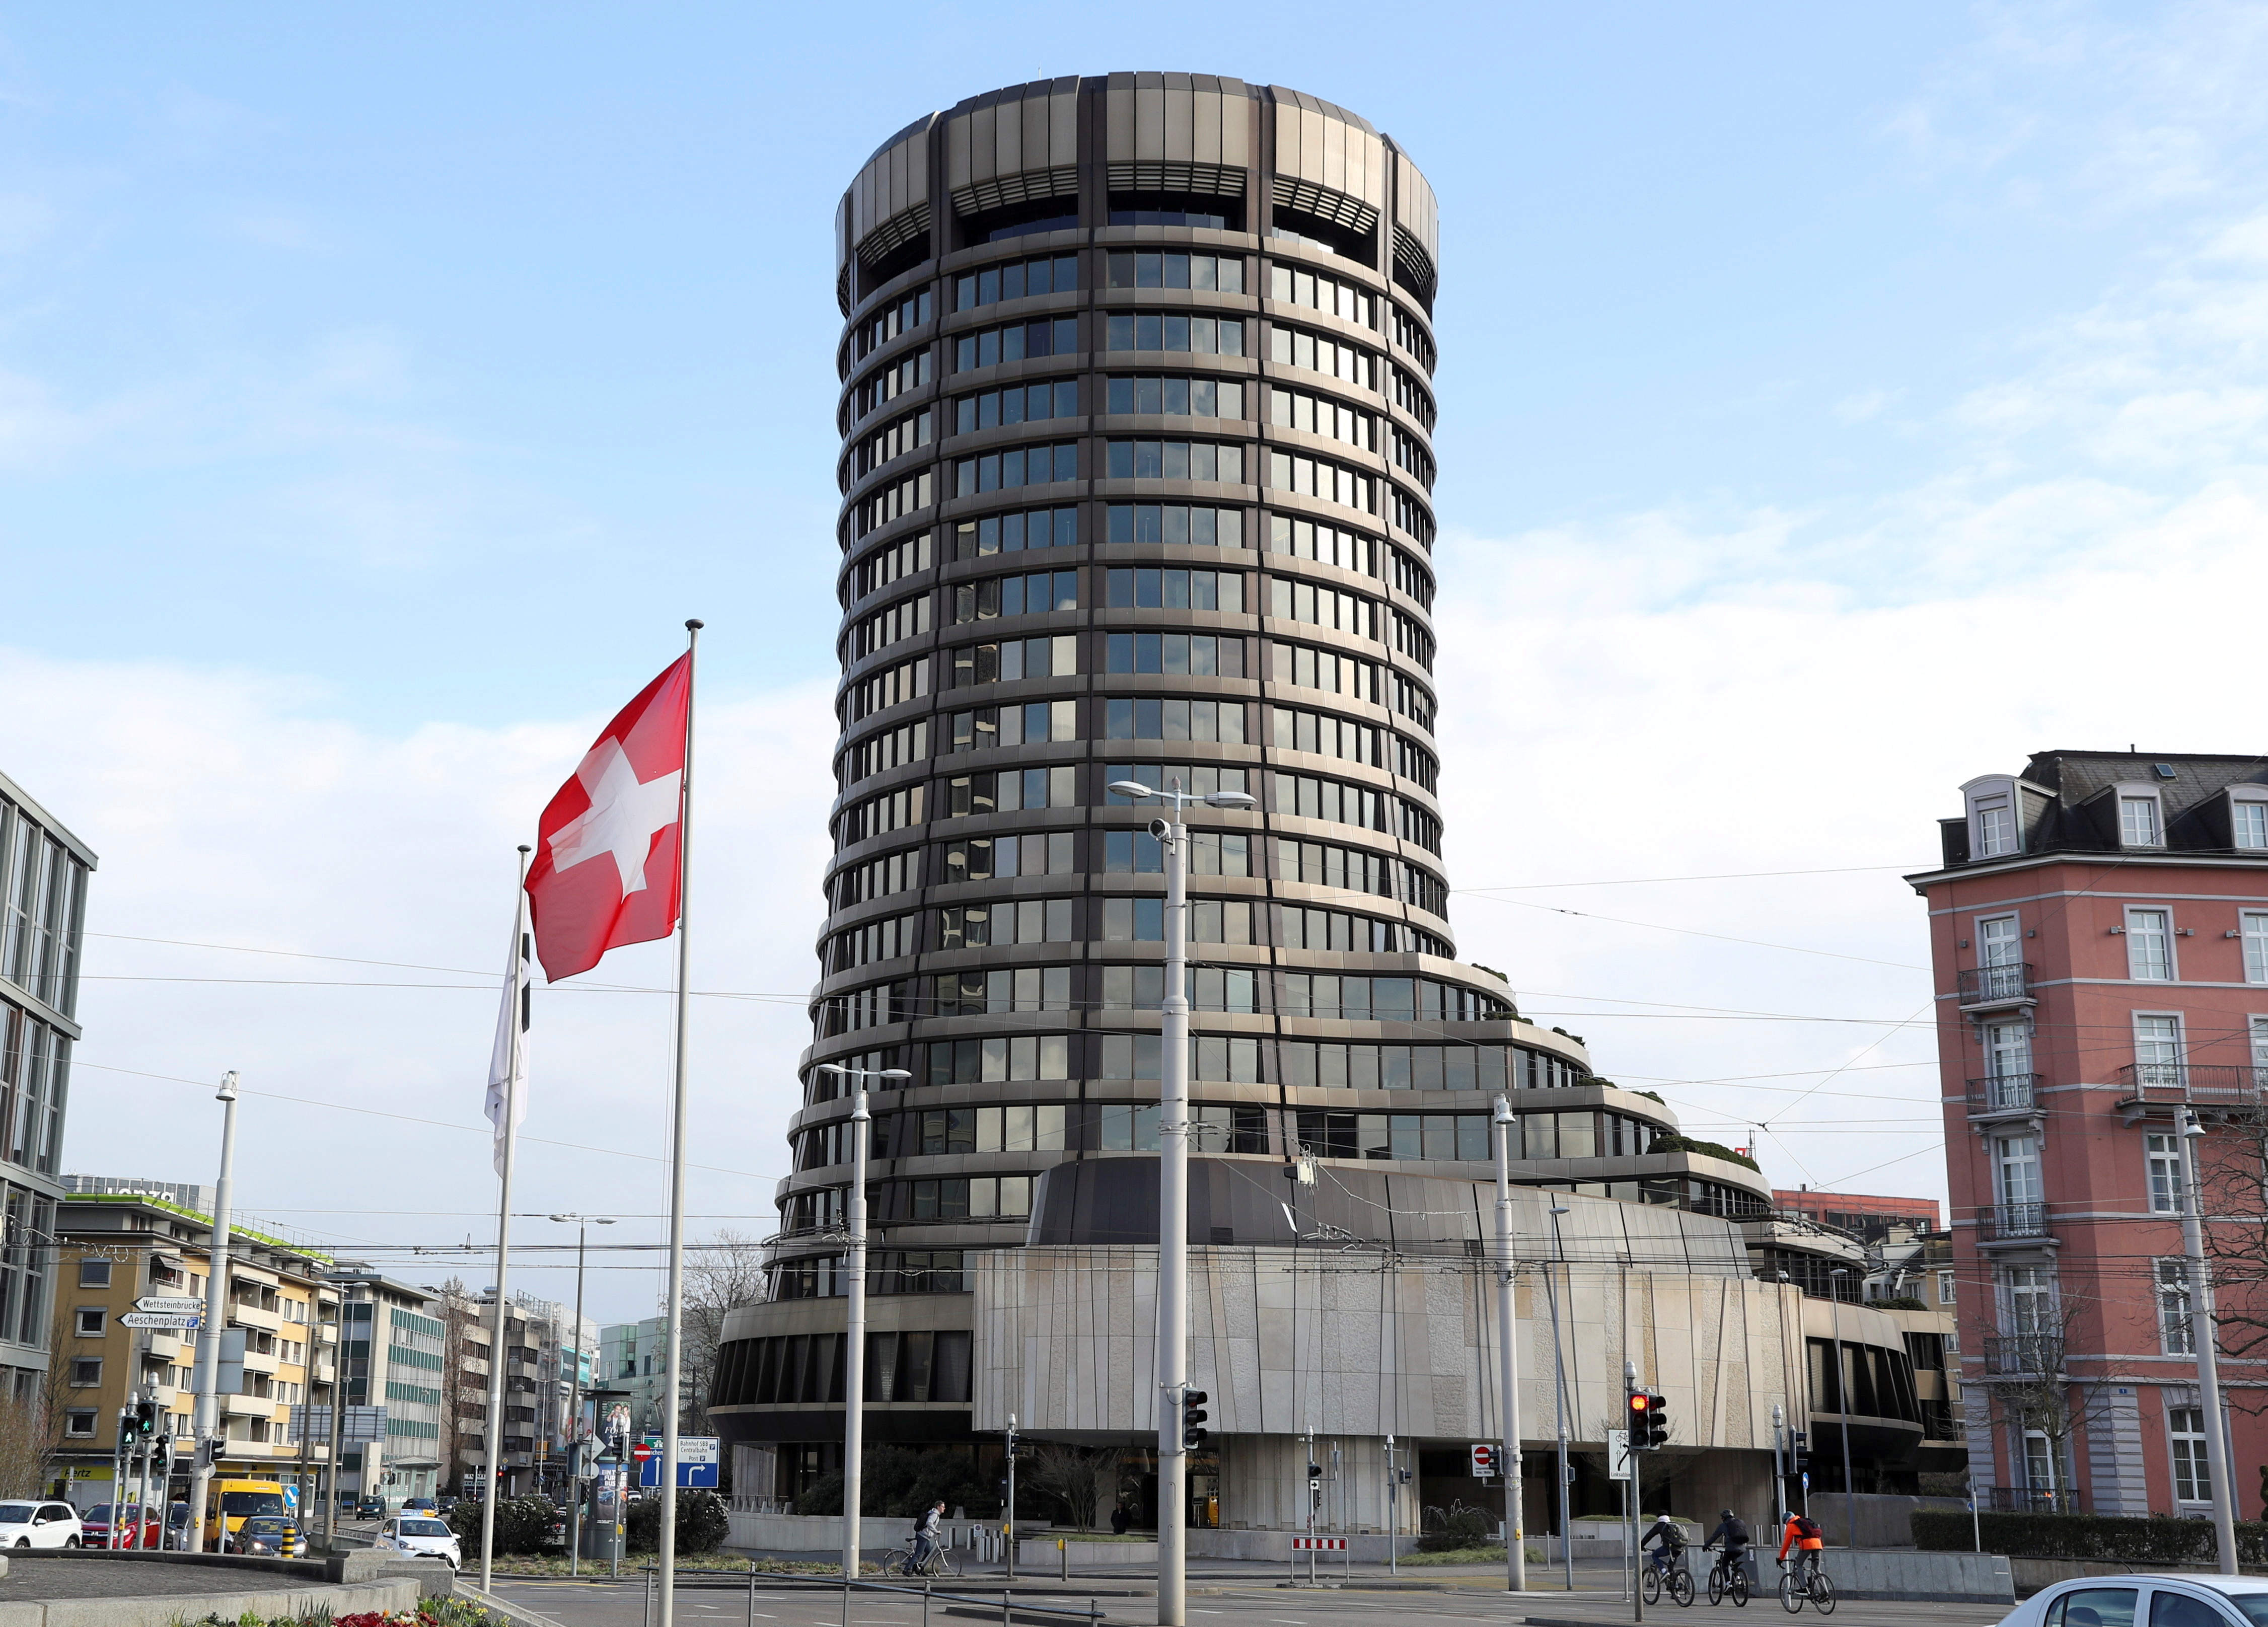 The tower of the headquarters of the Bank for International Settlements (BIS) is seen in Basel, Switzerland March 18, 2021. REUTERS/Arnd Wiegmann